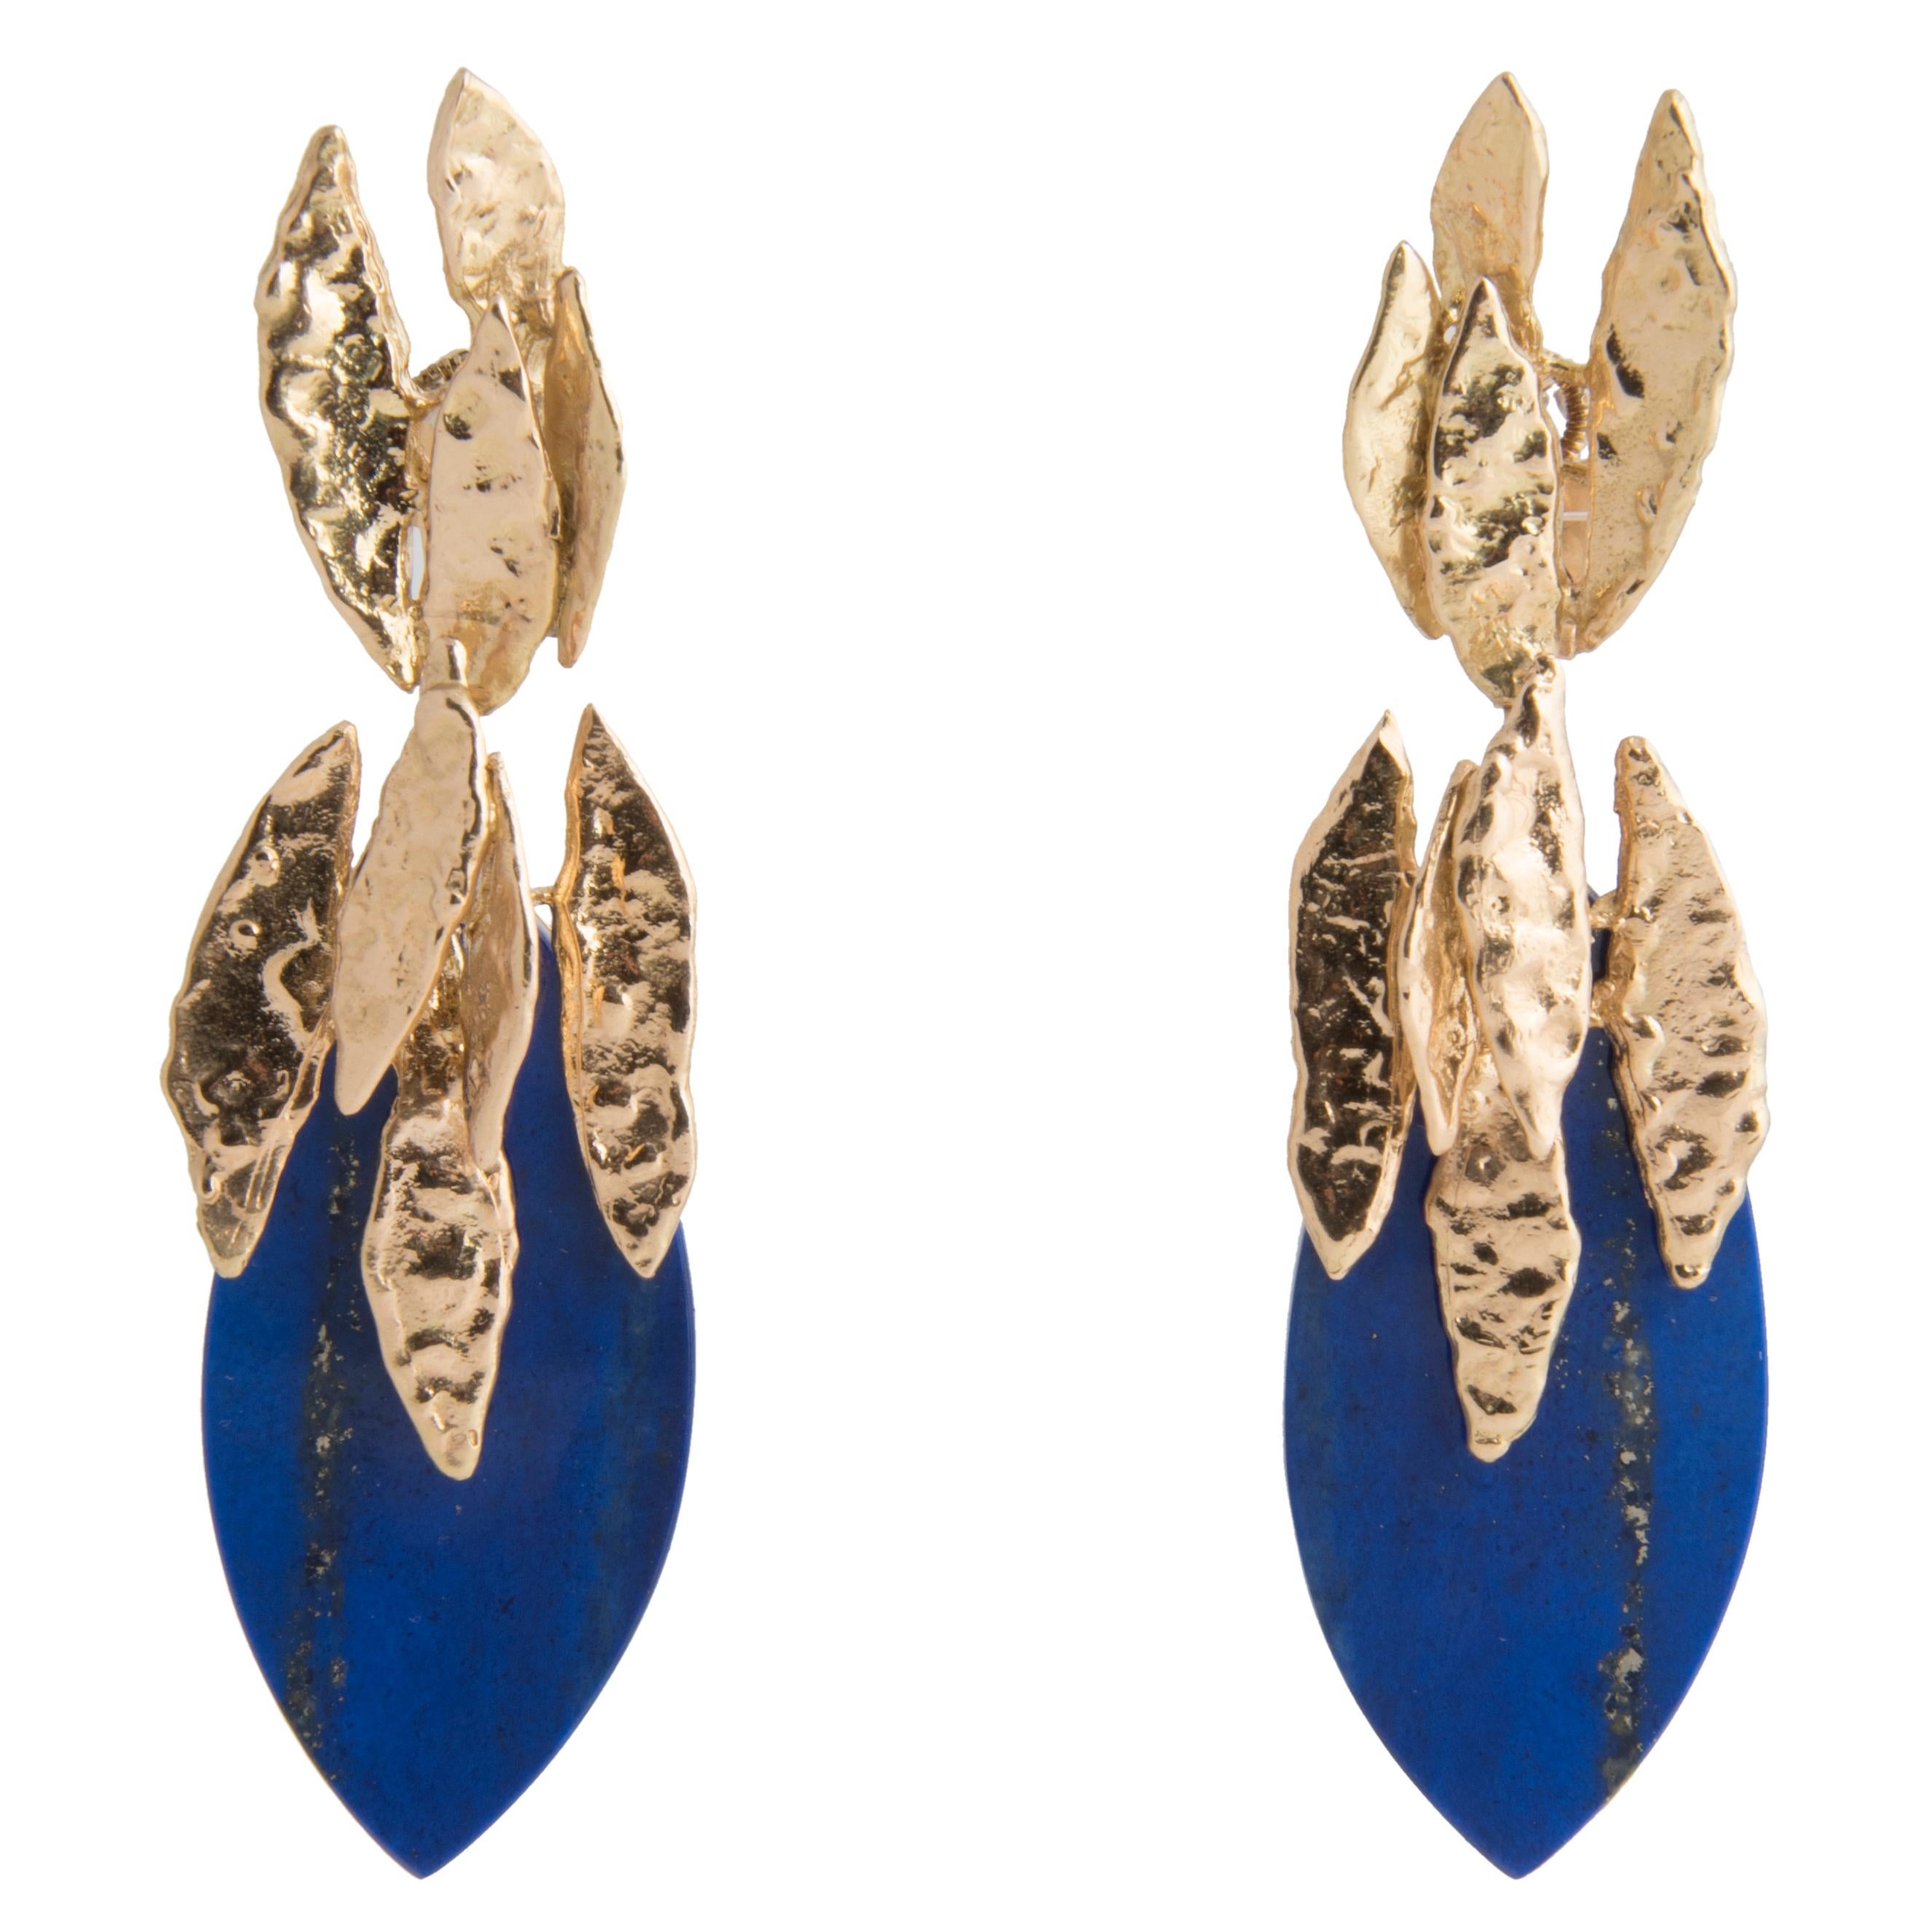 Stylish pair of clip-on drop earrings by Chaumet Paris, designed as 18k textured gold leaves holding amazing quality pointed oval Lapis Lazuli plaques
Signed Chaumet Paris, marker's mark, French hallmarks
1970s

These earrings were most probable